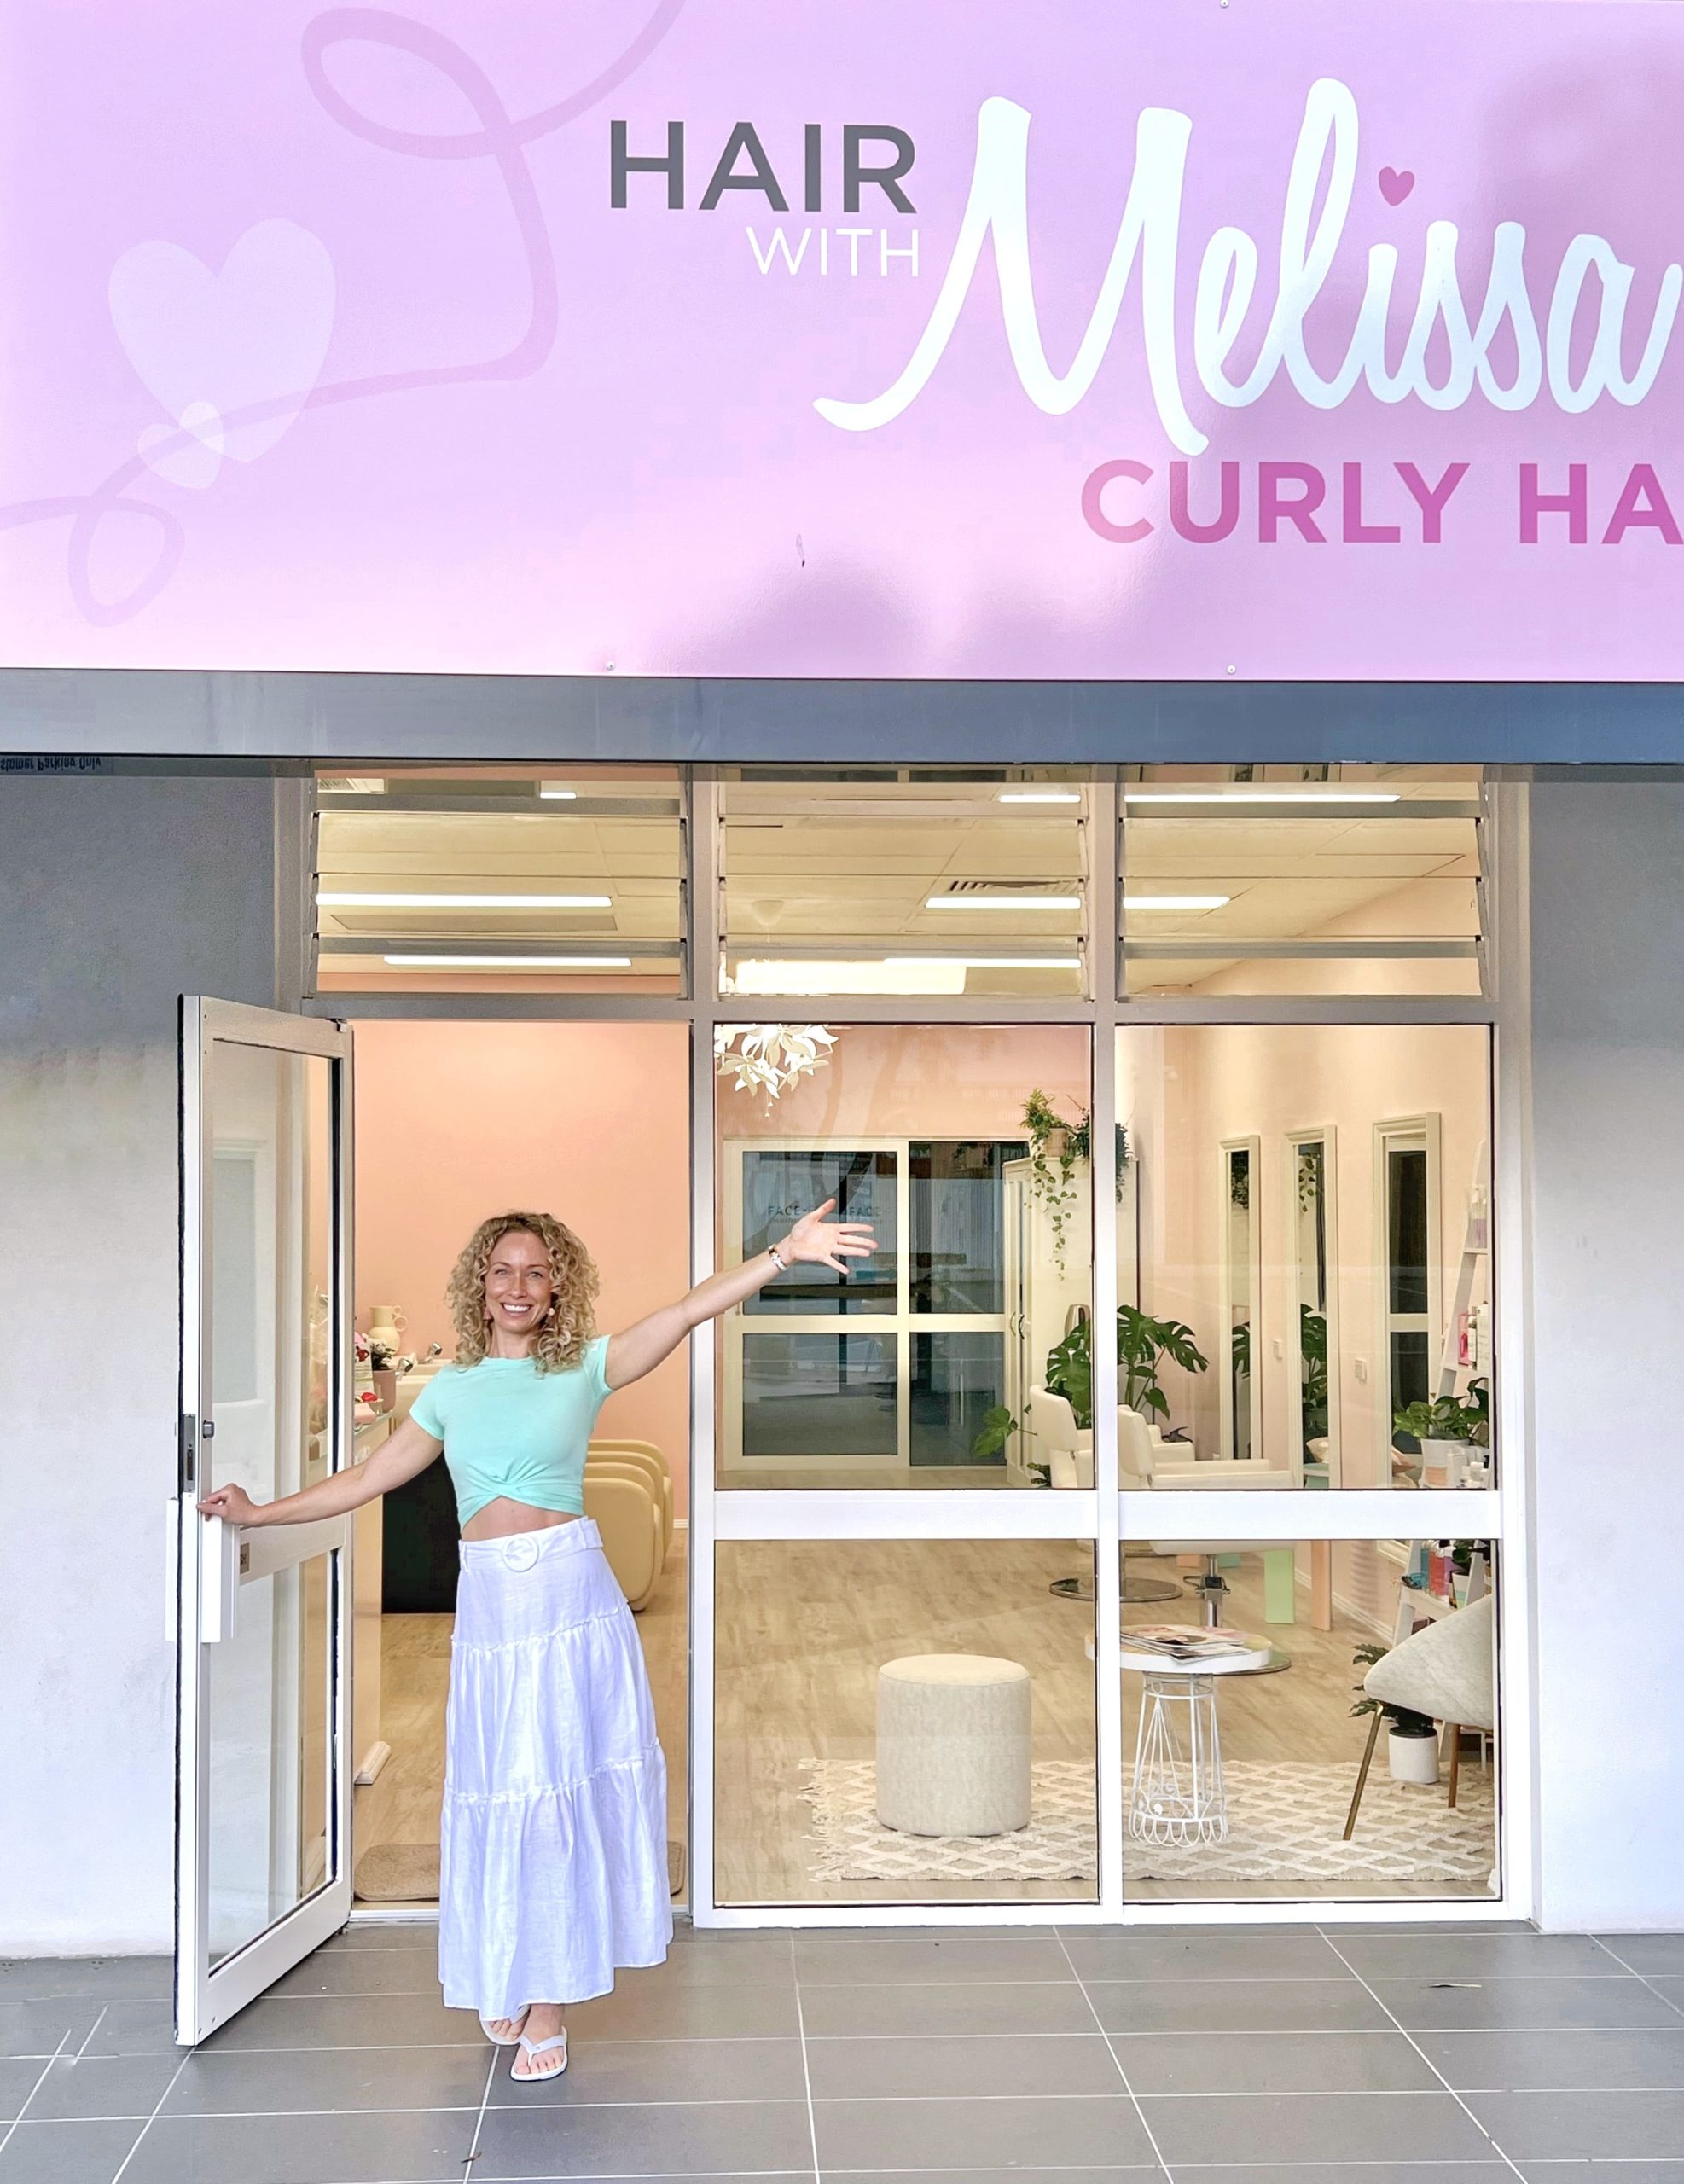 melissa salon curly cuts, curl detox, and curl styling